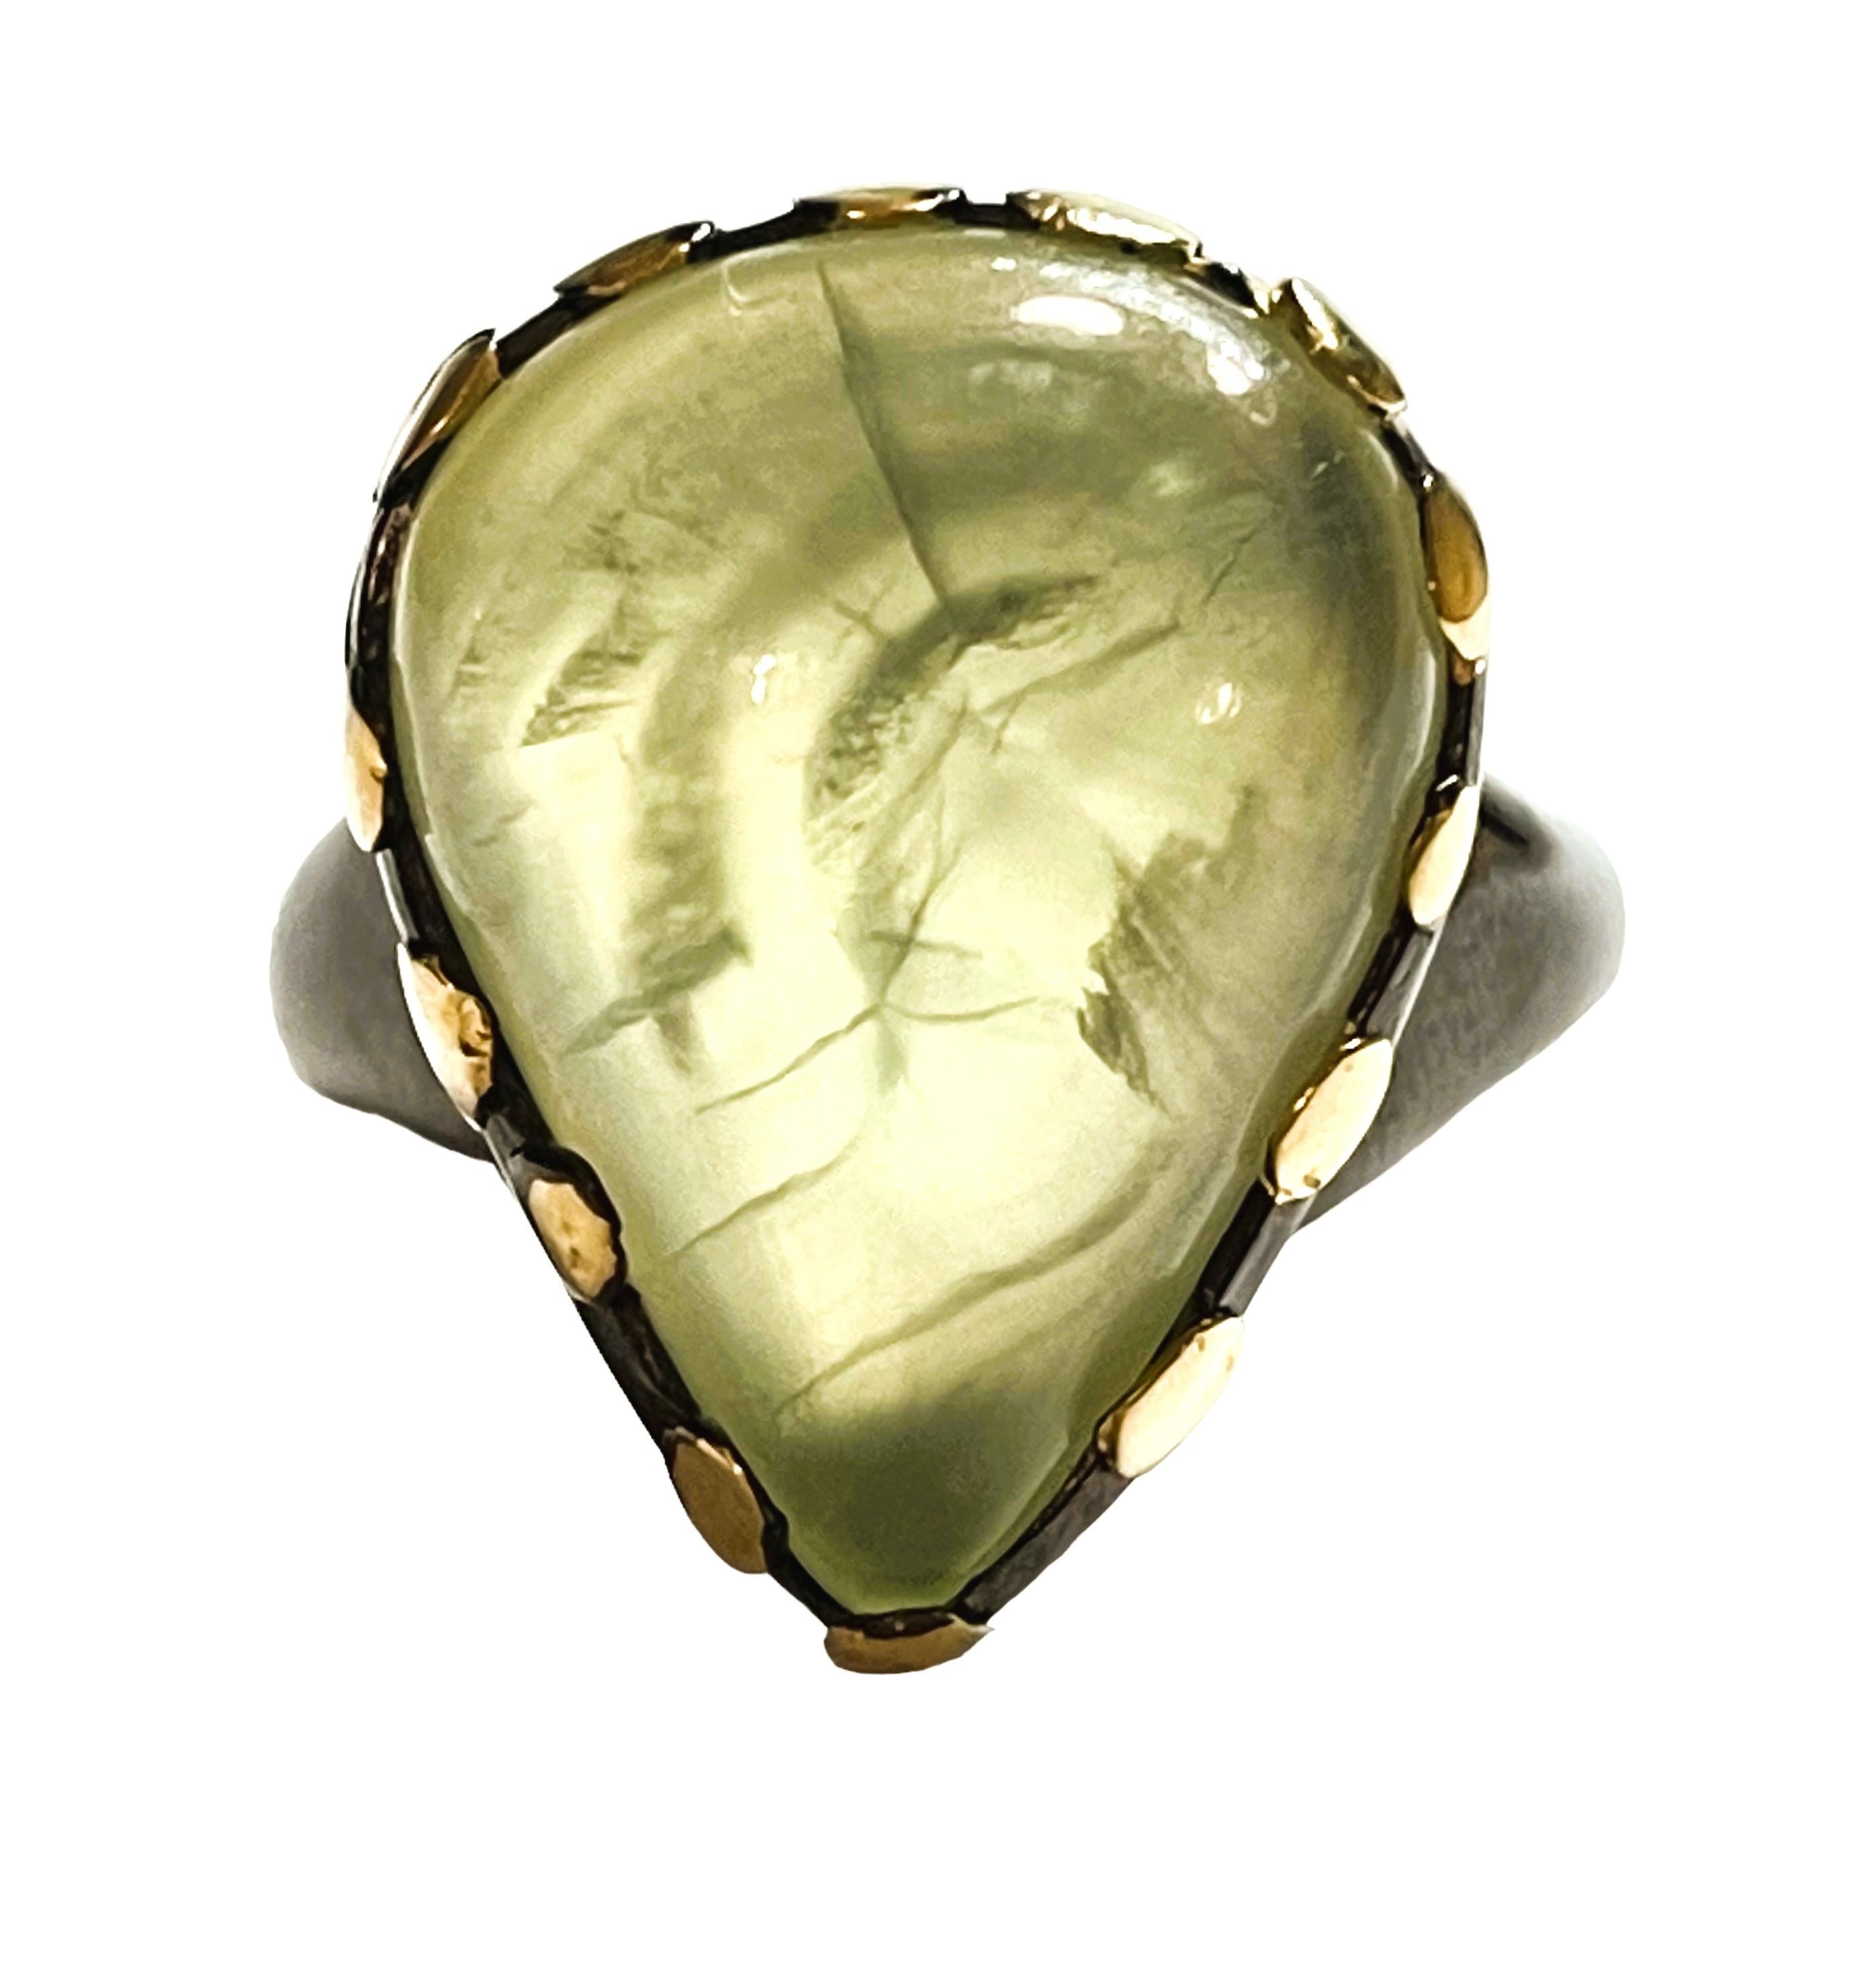 What a gorgeous ring!  It is a size 8.5.   It is an authentic natural stone.  So you can bid with confidence.   I just love this color and the beautiful setting it's in with the yellow gold accents on a Oxi-Black Sterling setting.  It is an pear cut